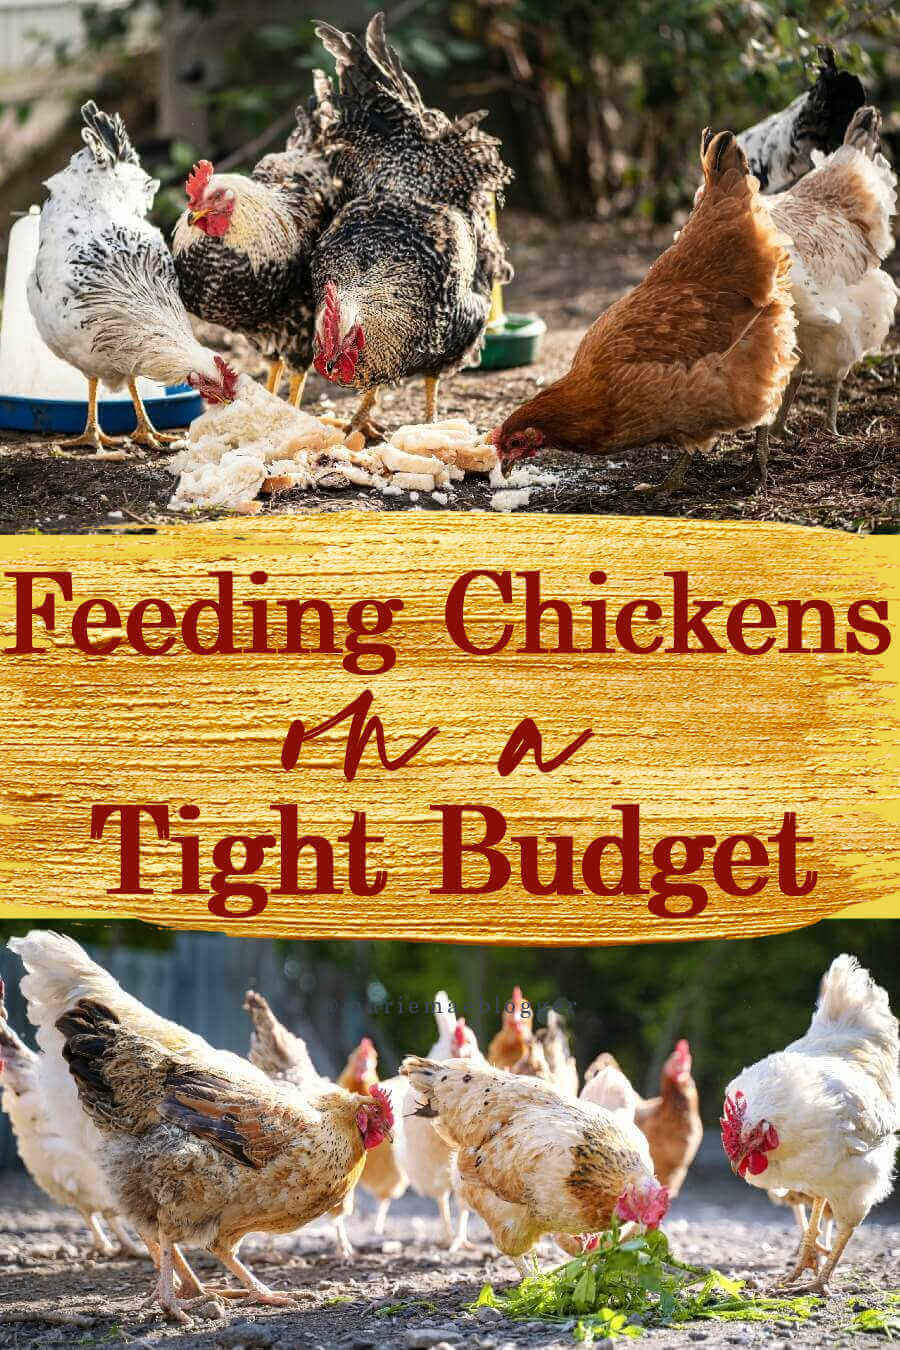 What Can You Feed Chickens?